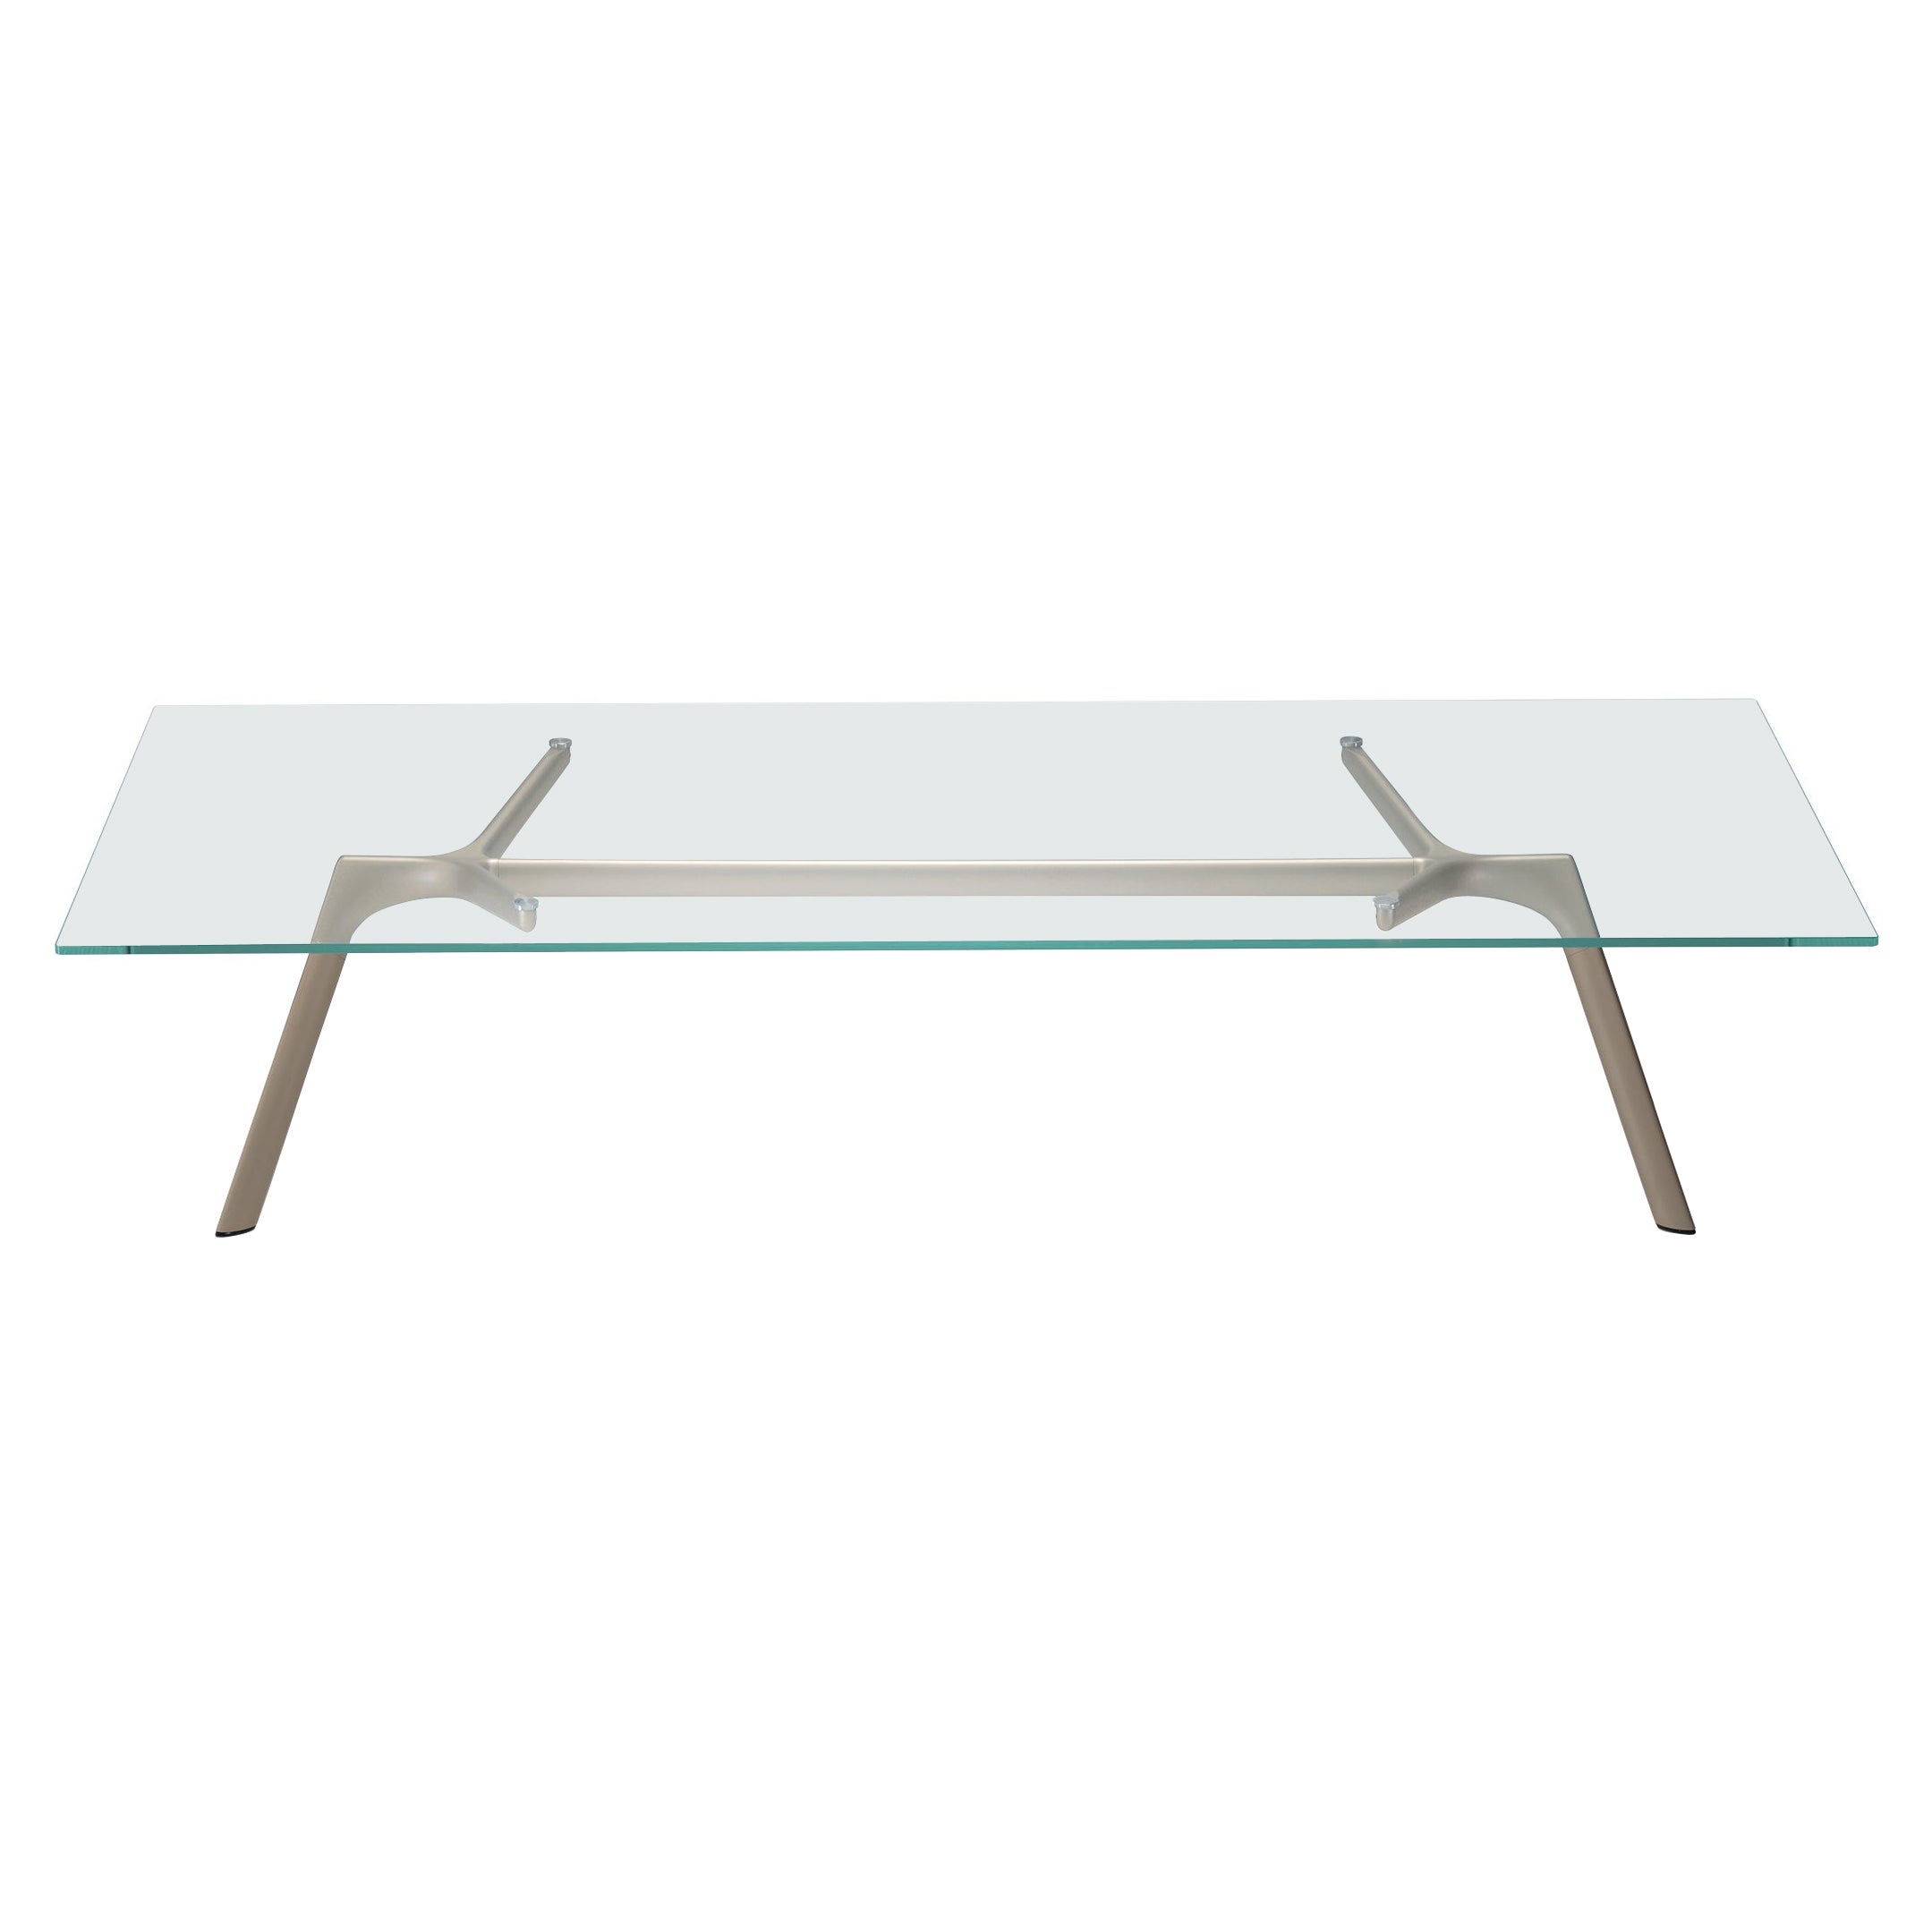 Alias Large Dry XS 45B Table in Glass Top with Anodised Gold Metallic Frame